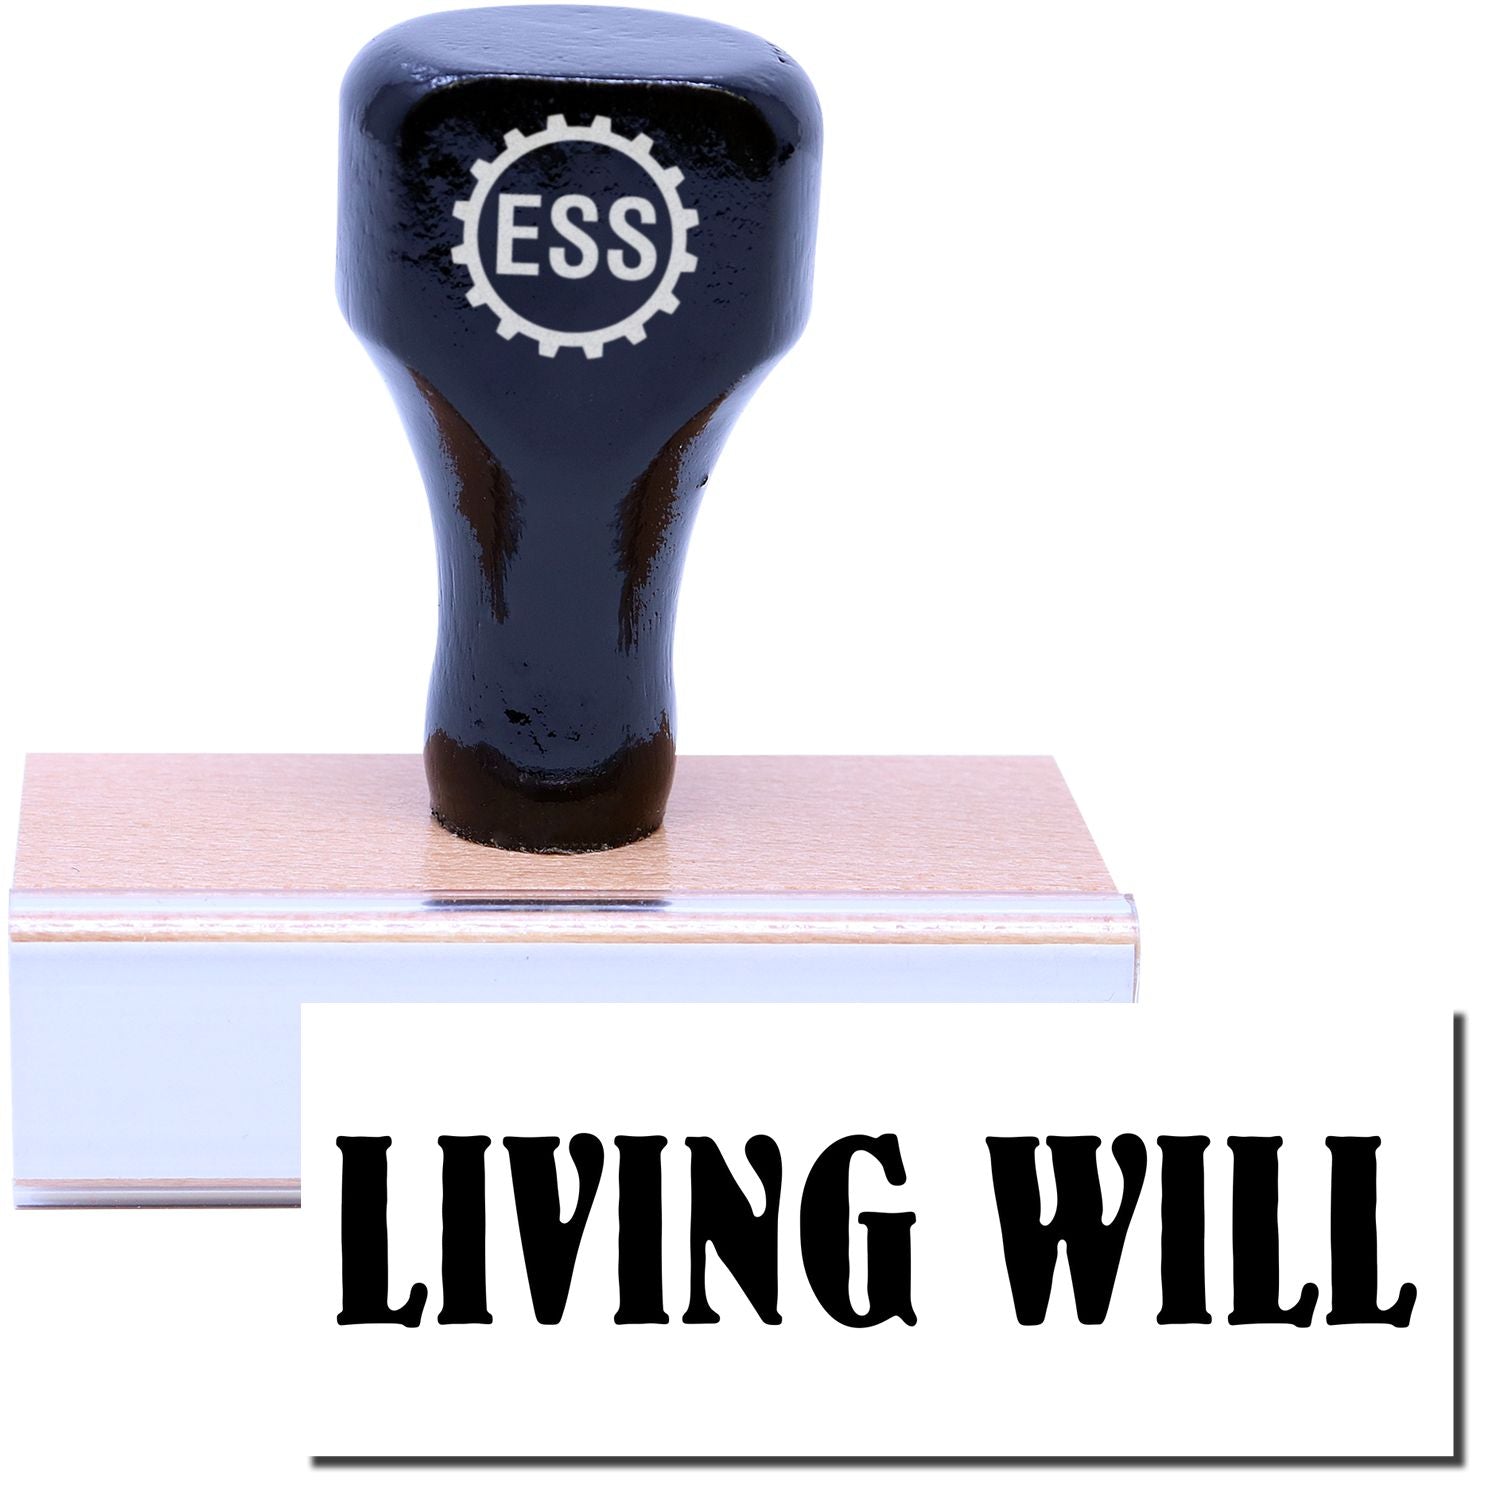 A stock office rubber stamp with a stamped image showing how the text "LIVING WILL" is displayed after stamping.